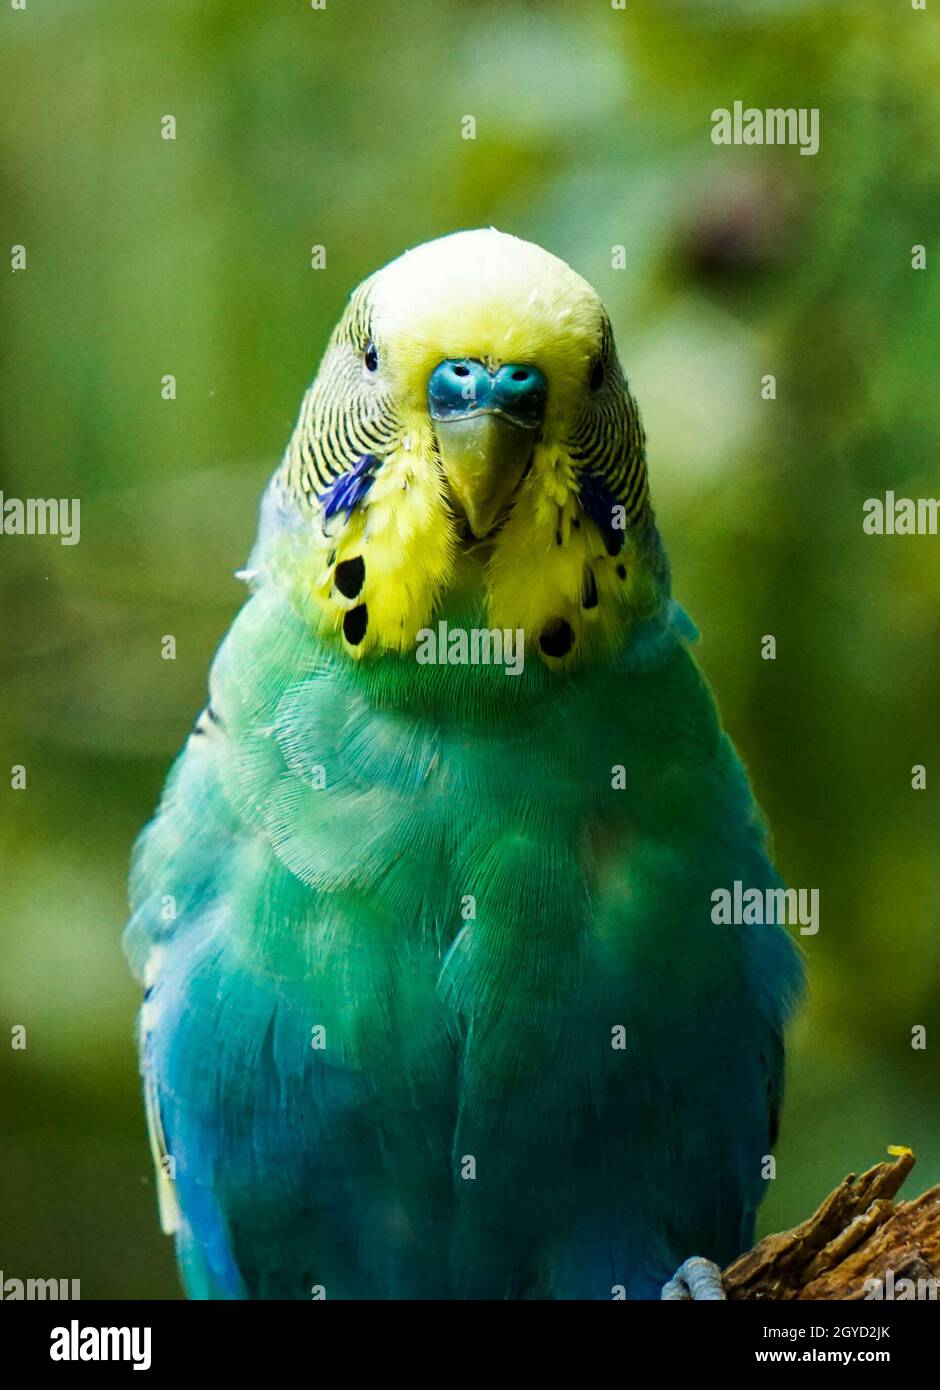 Portrait of a colorful budgerigar in the blurred background Stock Photo